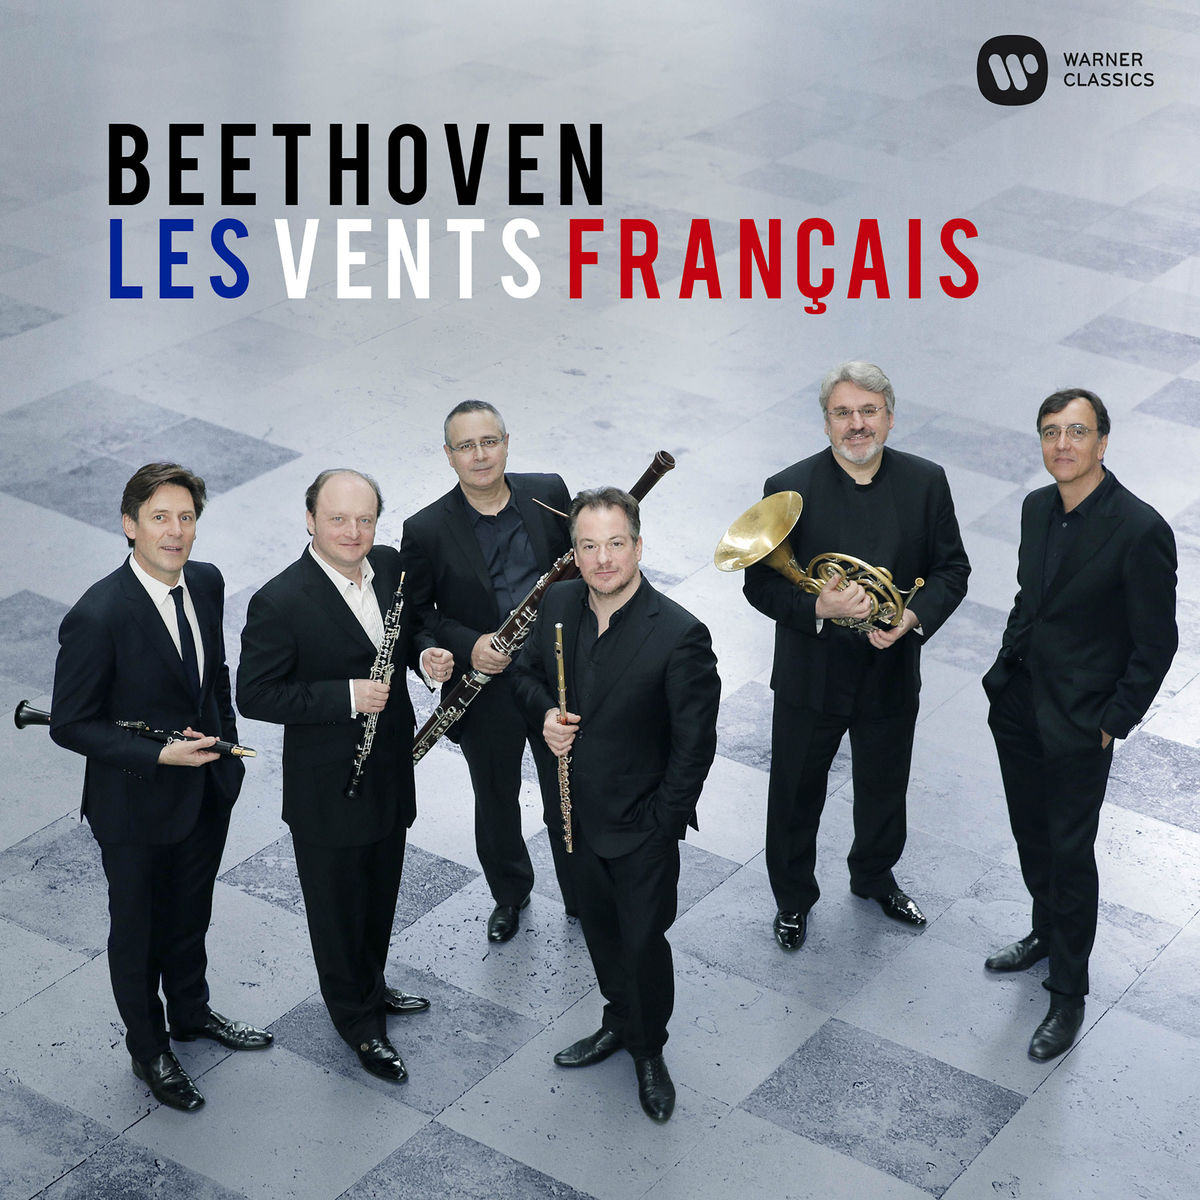 Les Vents Francais – Beethoven: Chamber Music for Winds (2017) [Qobuz FLAC 24bit/48kHz]